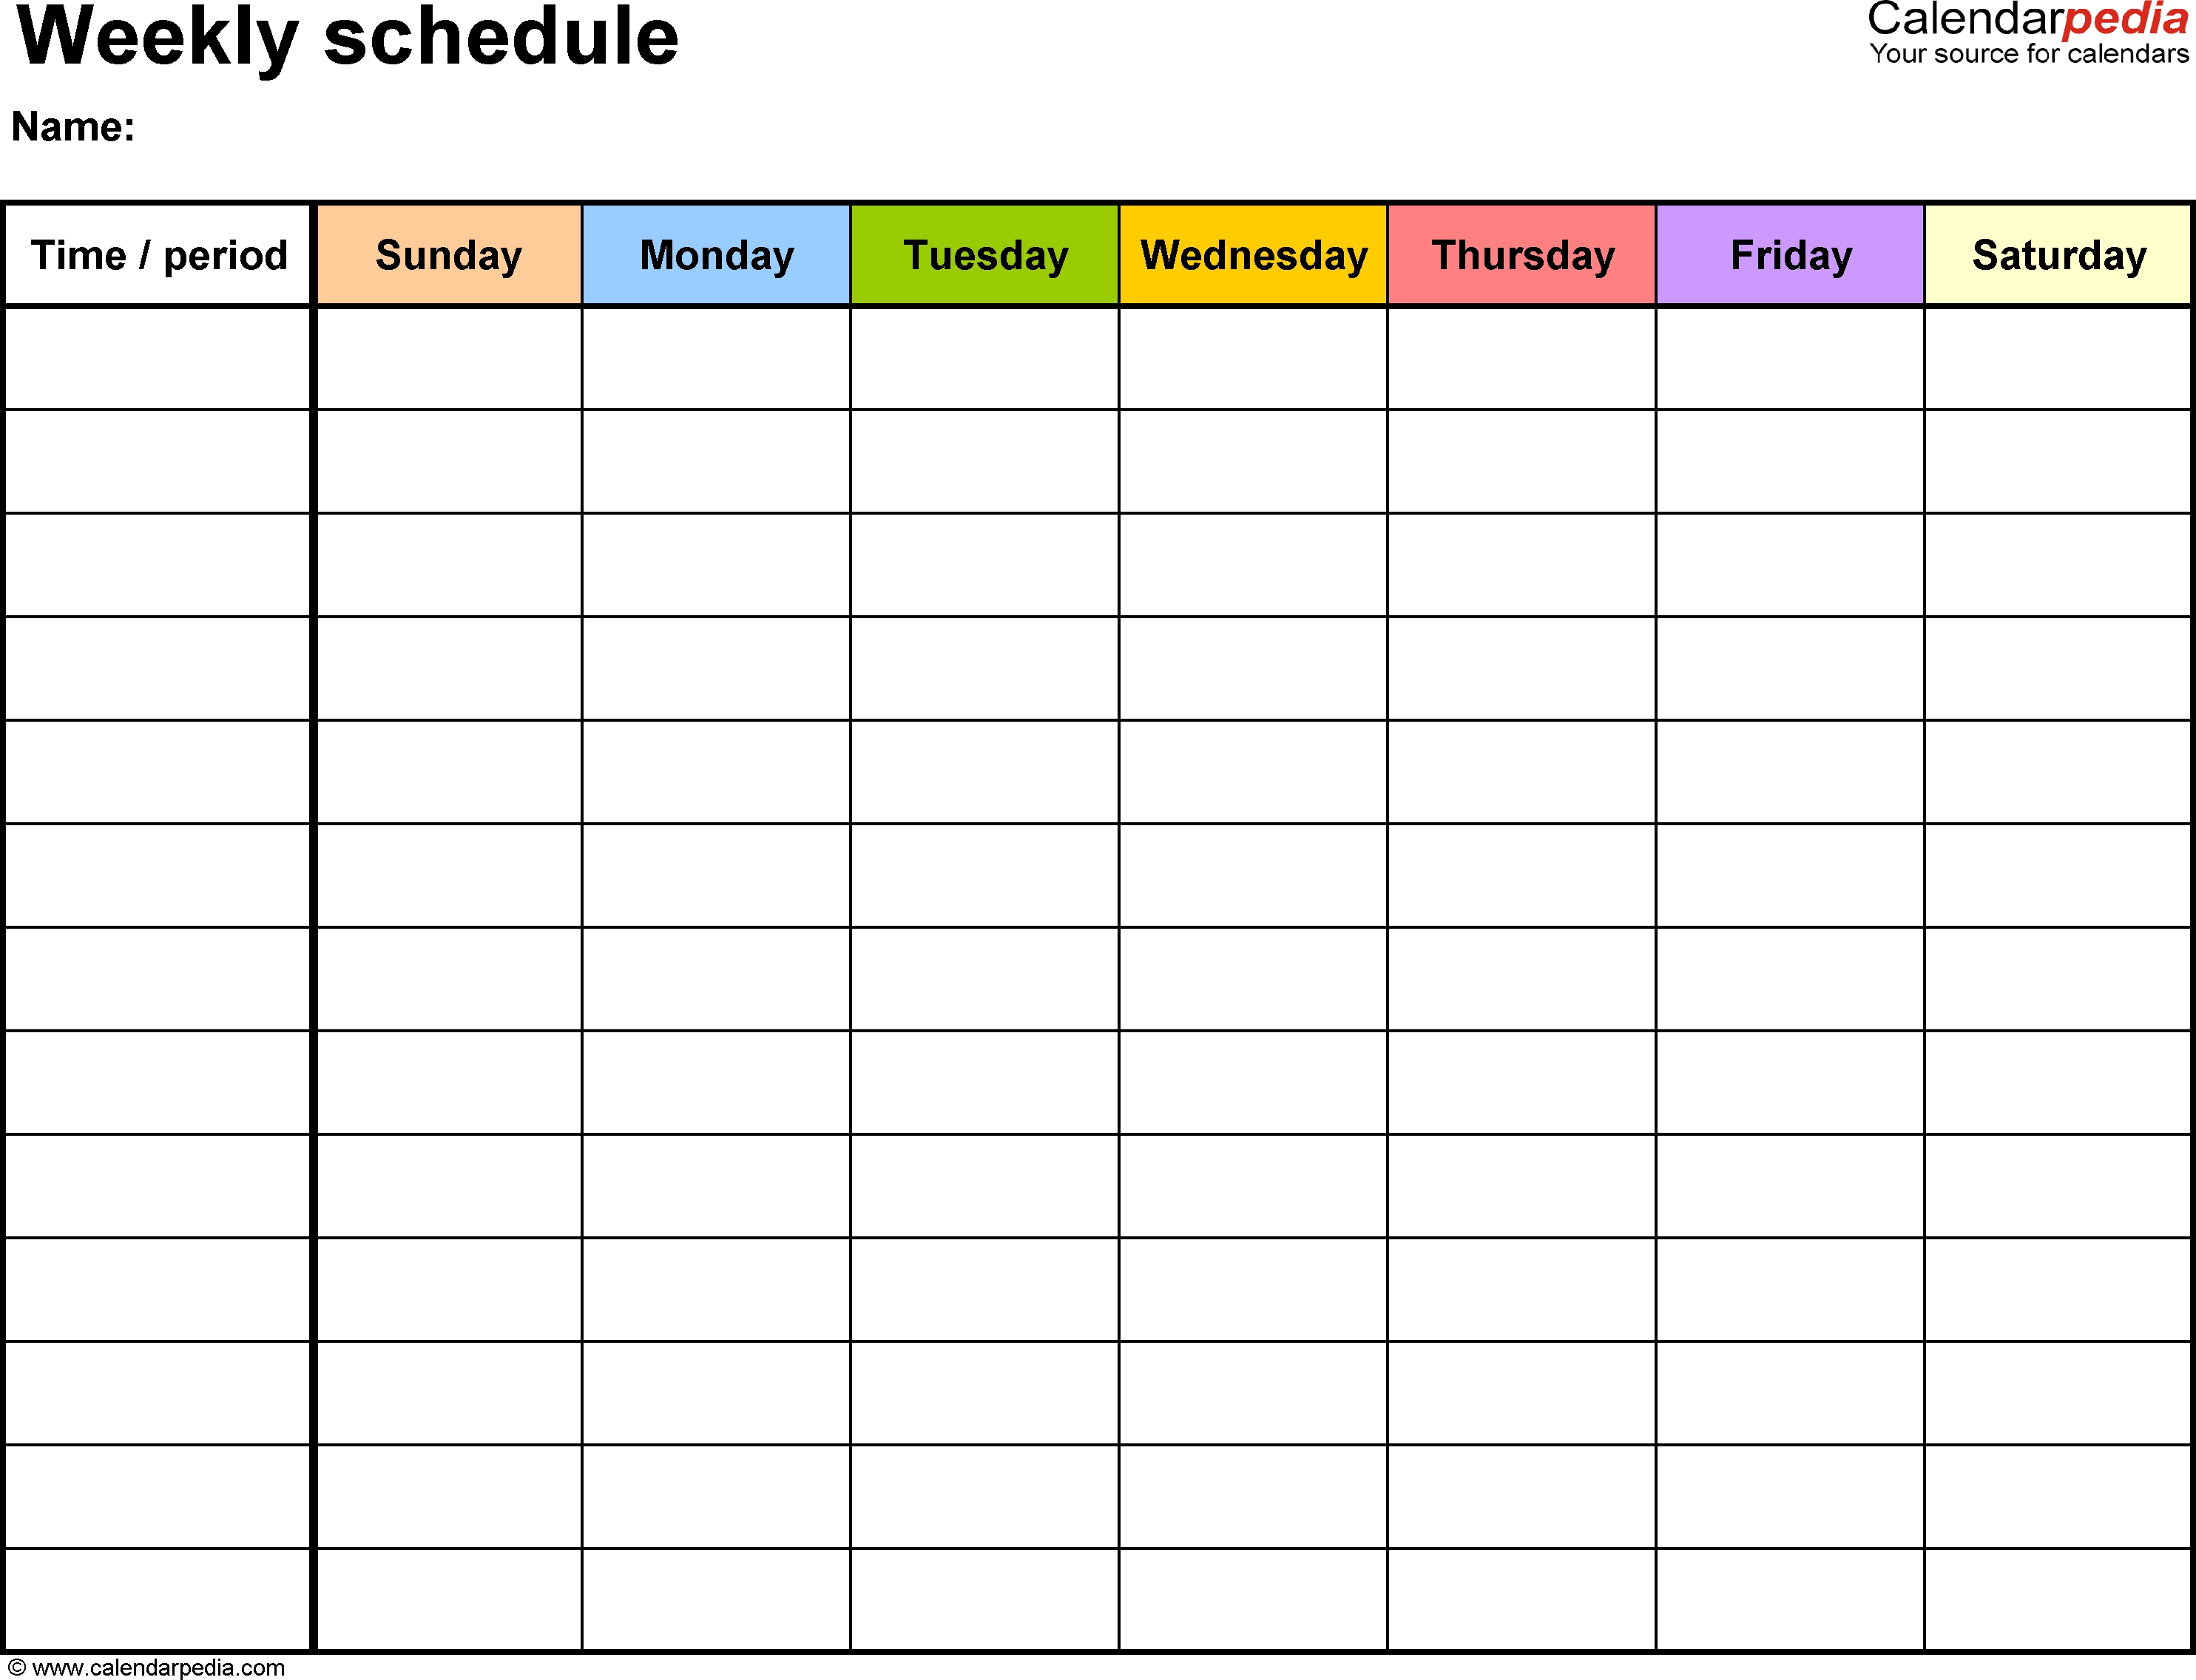 Free Weekly Schedule Templates For Excel - 18 Templates intended for Blank Calendar Of Events Template